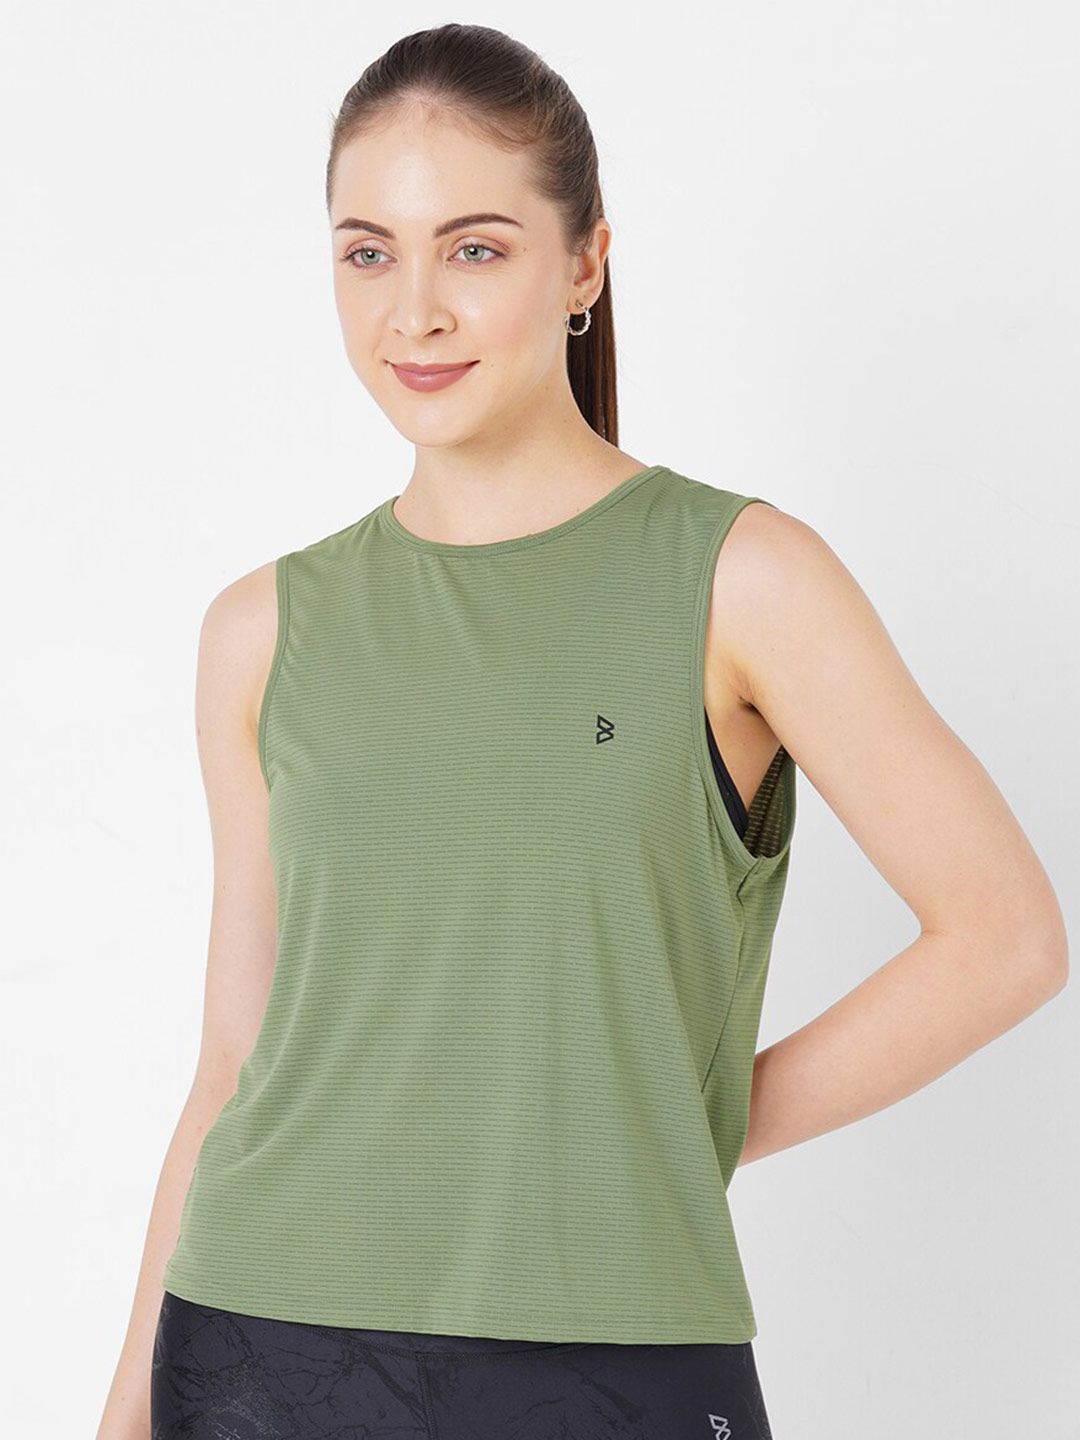 BODD ACTIVE Cut Out Tank Top Price in India